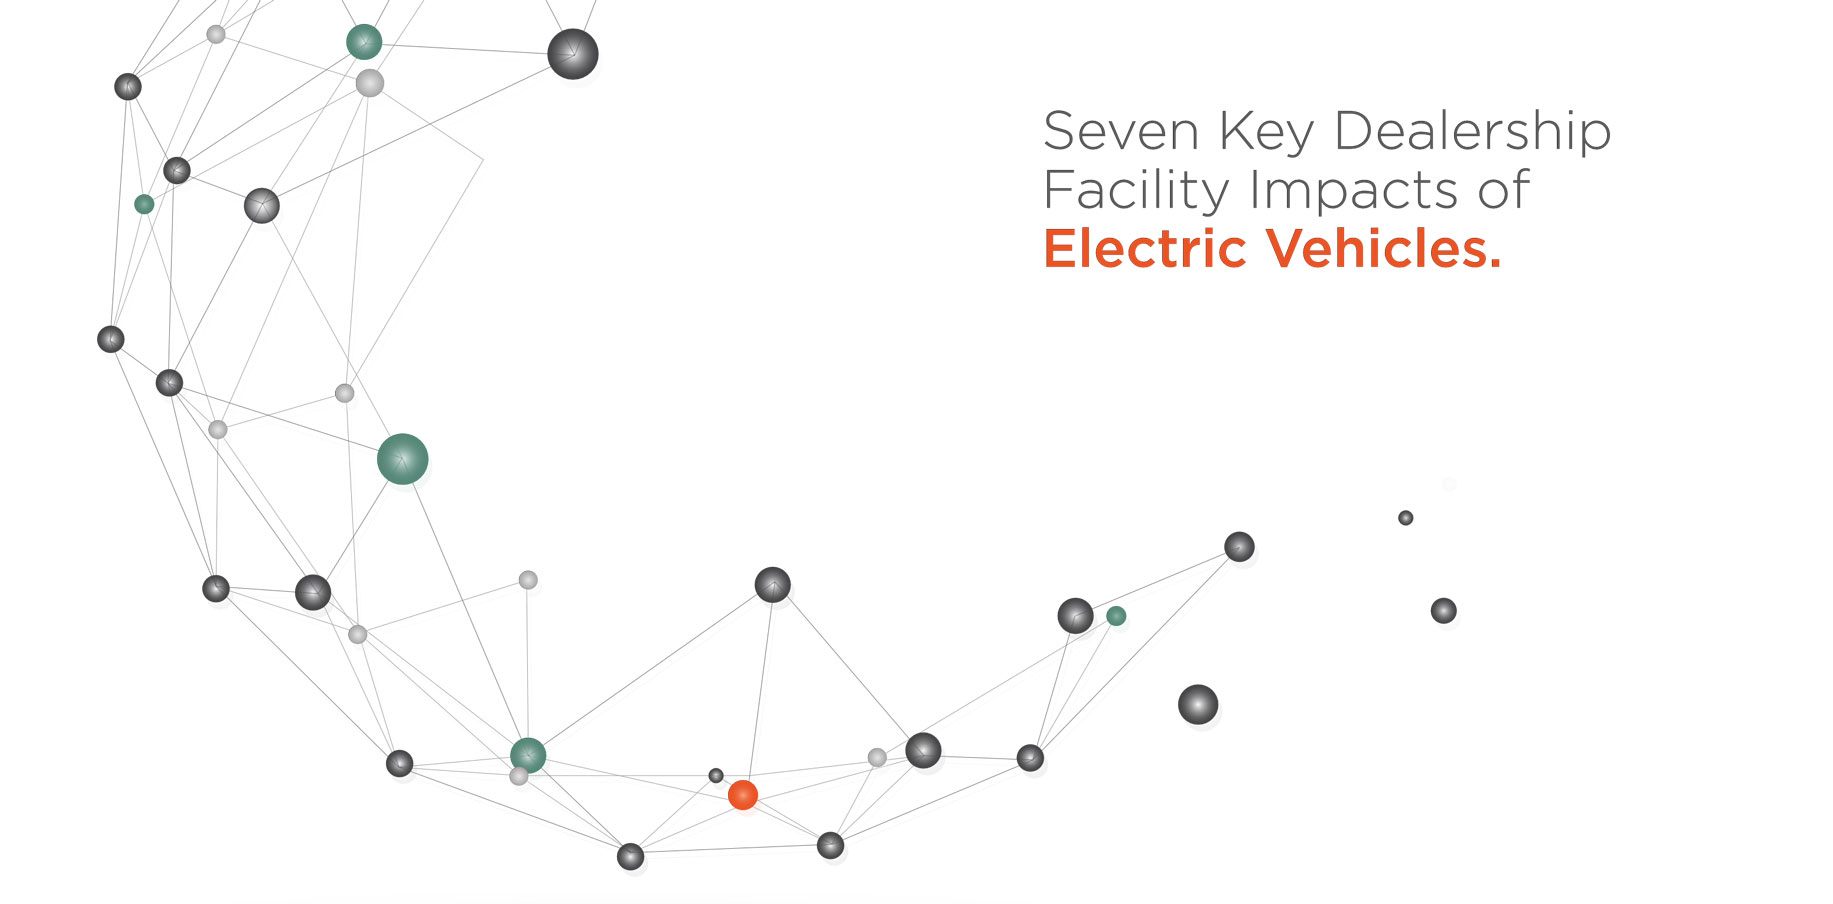 Tips to help dealers ready their facilities for EVs